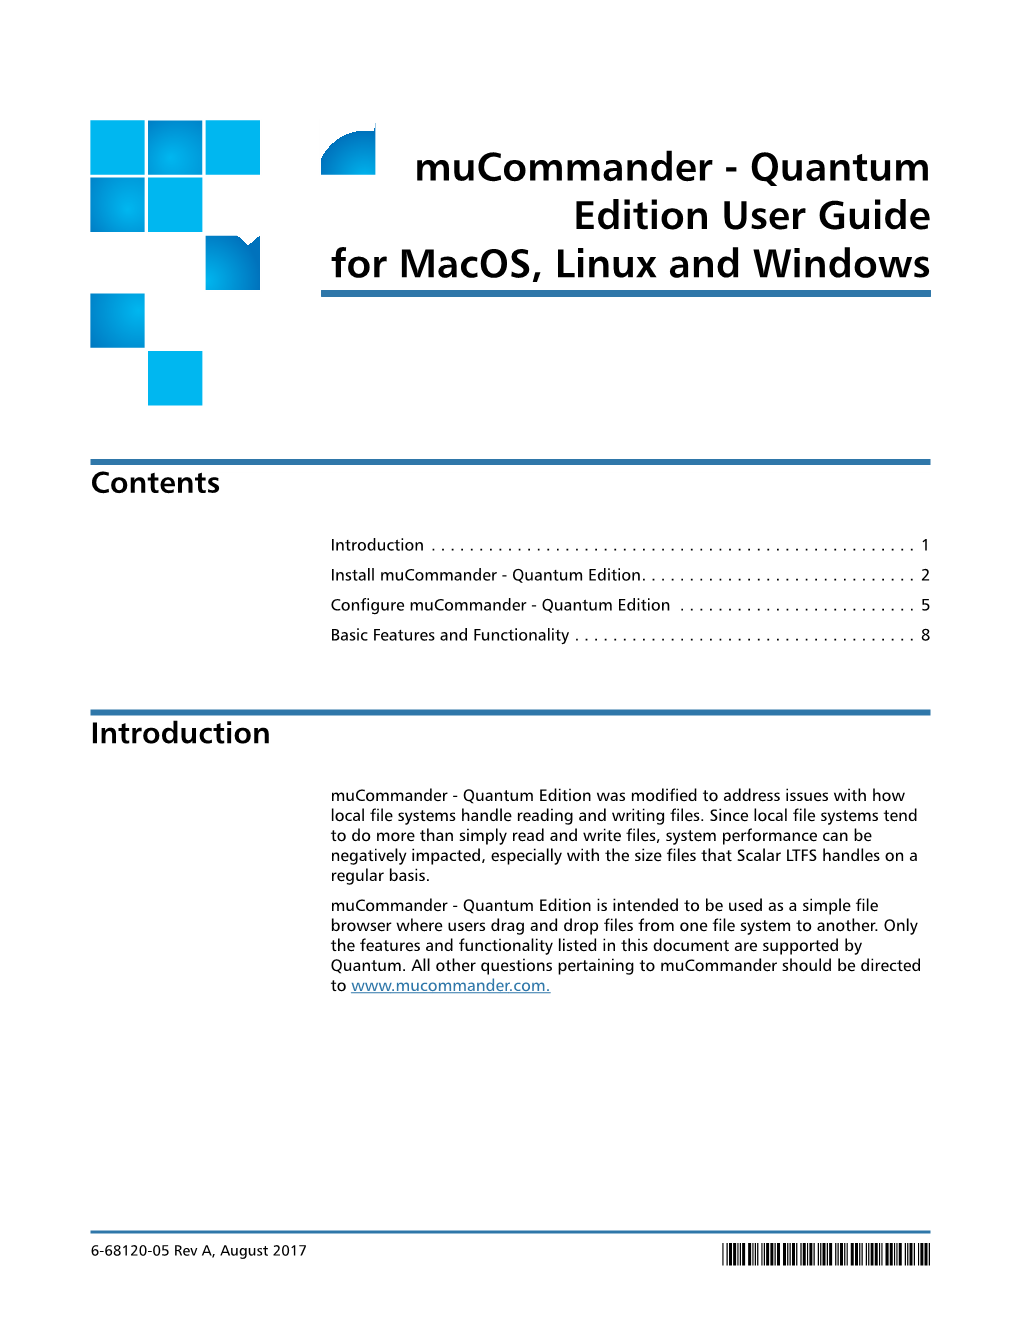 Mucommander - Quantum Edition User Guide for Macos, Linux and Windows